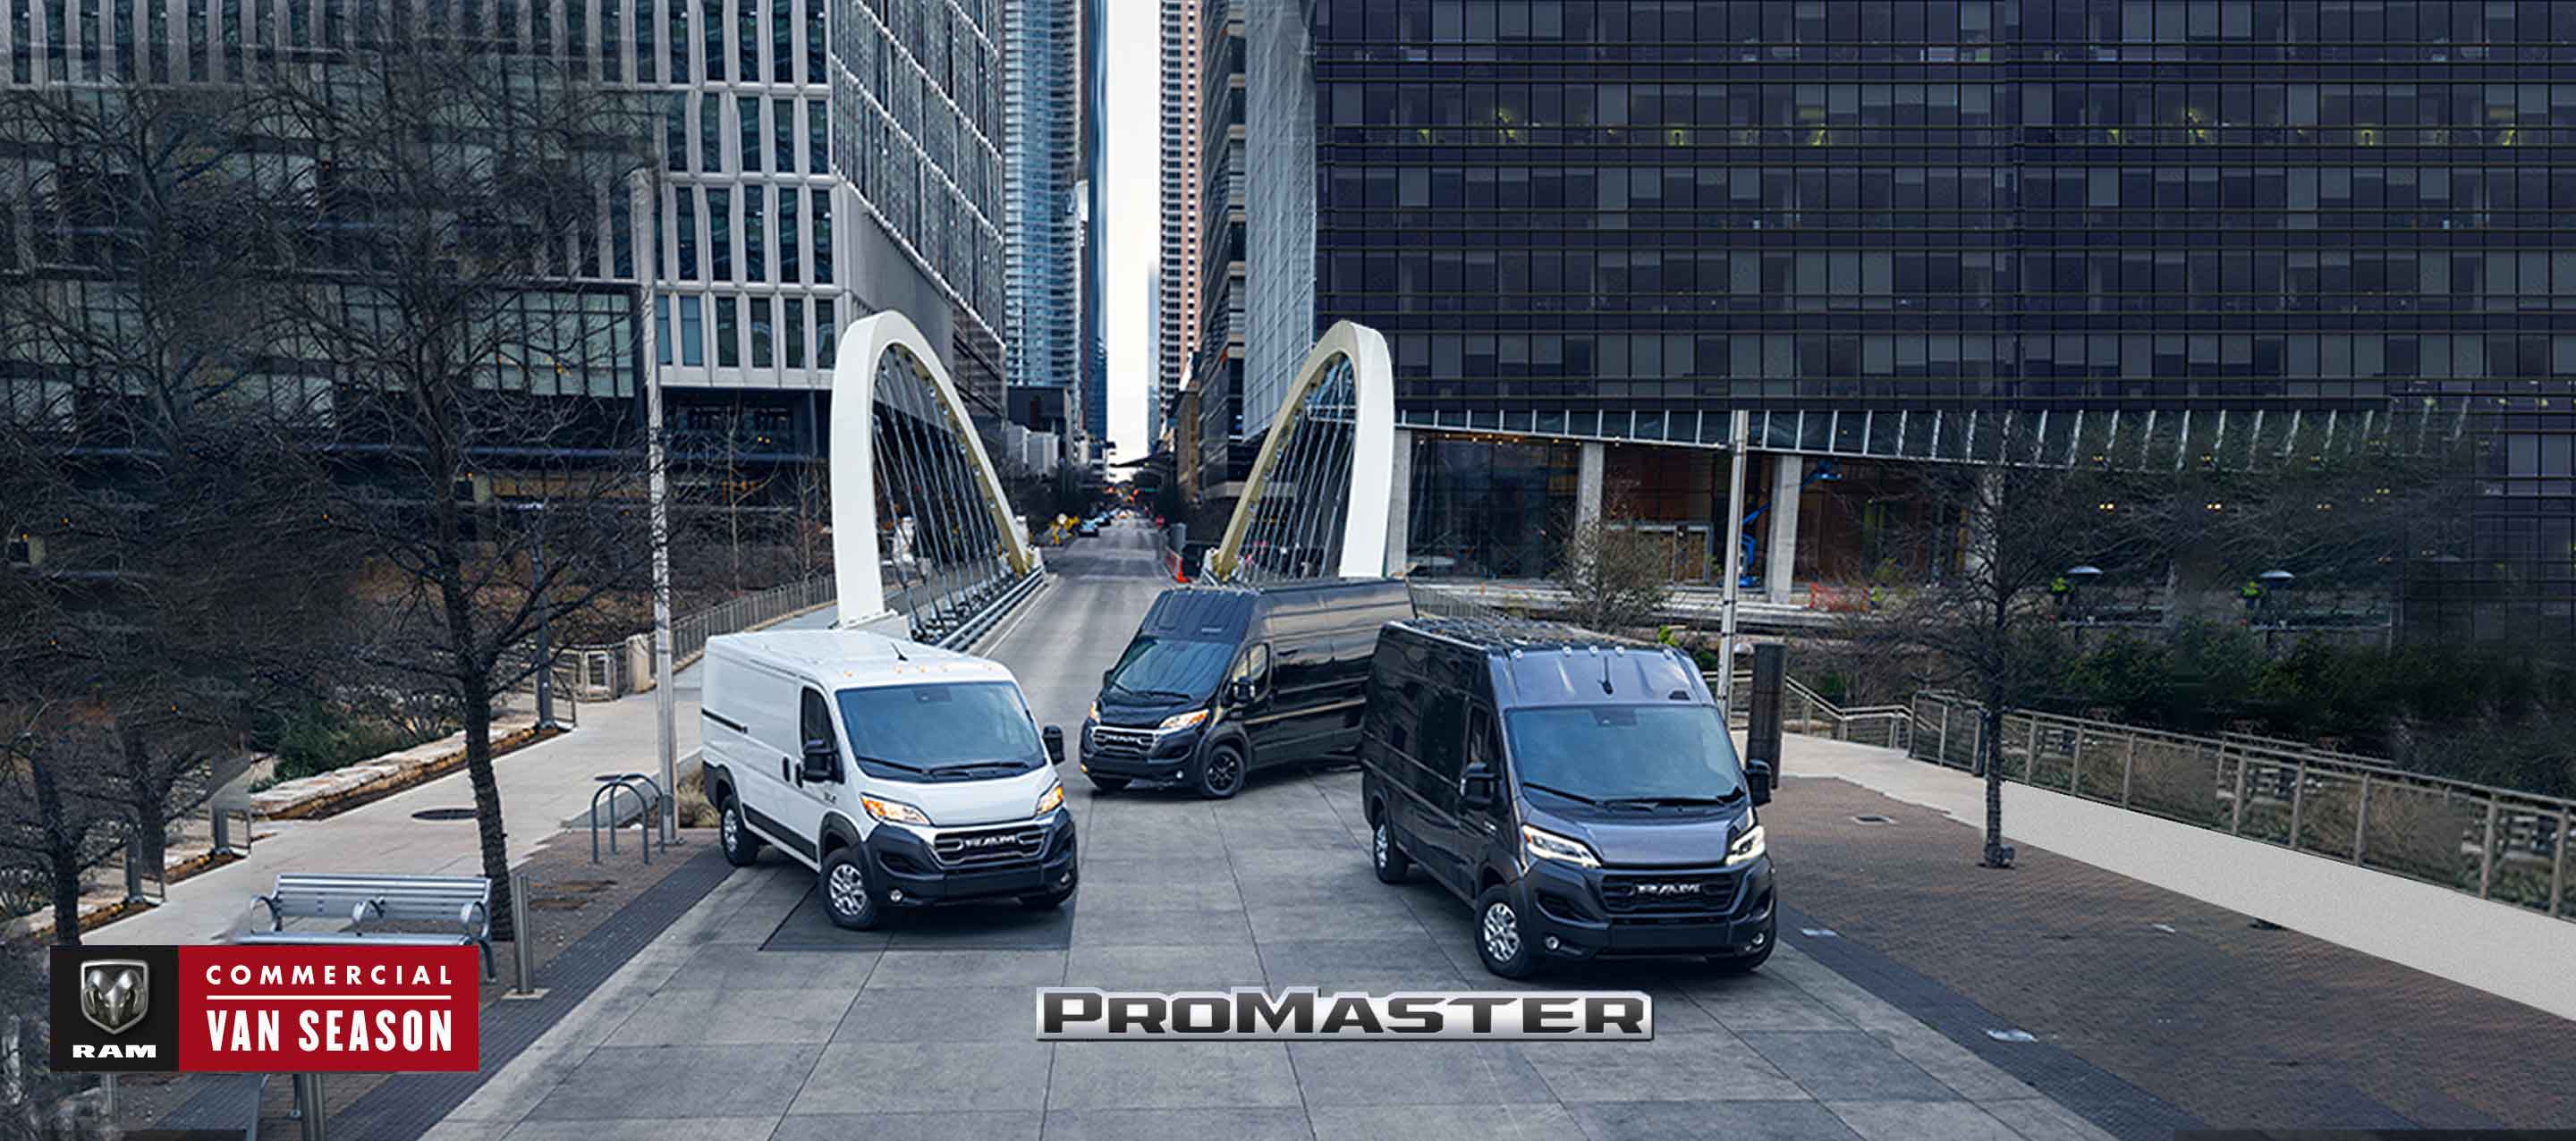 Ram Commercial Van season. A lineup of 2023 Ram ProMaster models, from left to right: the Ram ProMaster 1500 Cargo Van, the Ram ProMaster 3500 High Roof Cargo Van and the Ram ProMaster 2500 Cargo Van Super High Roof.